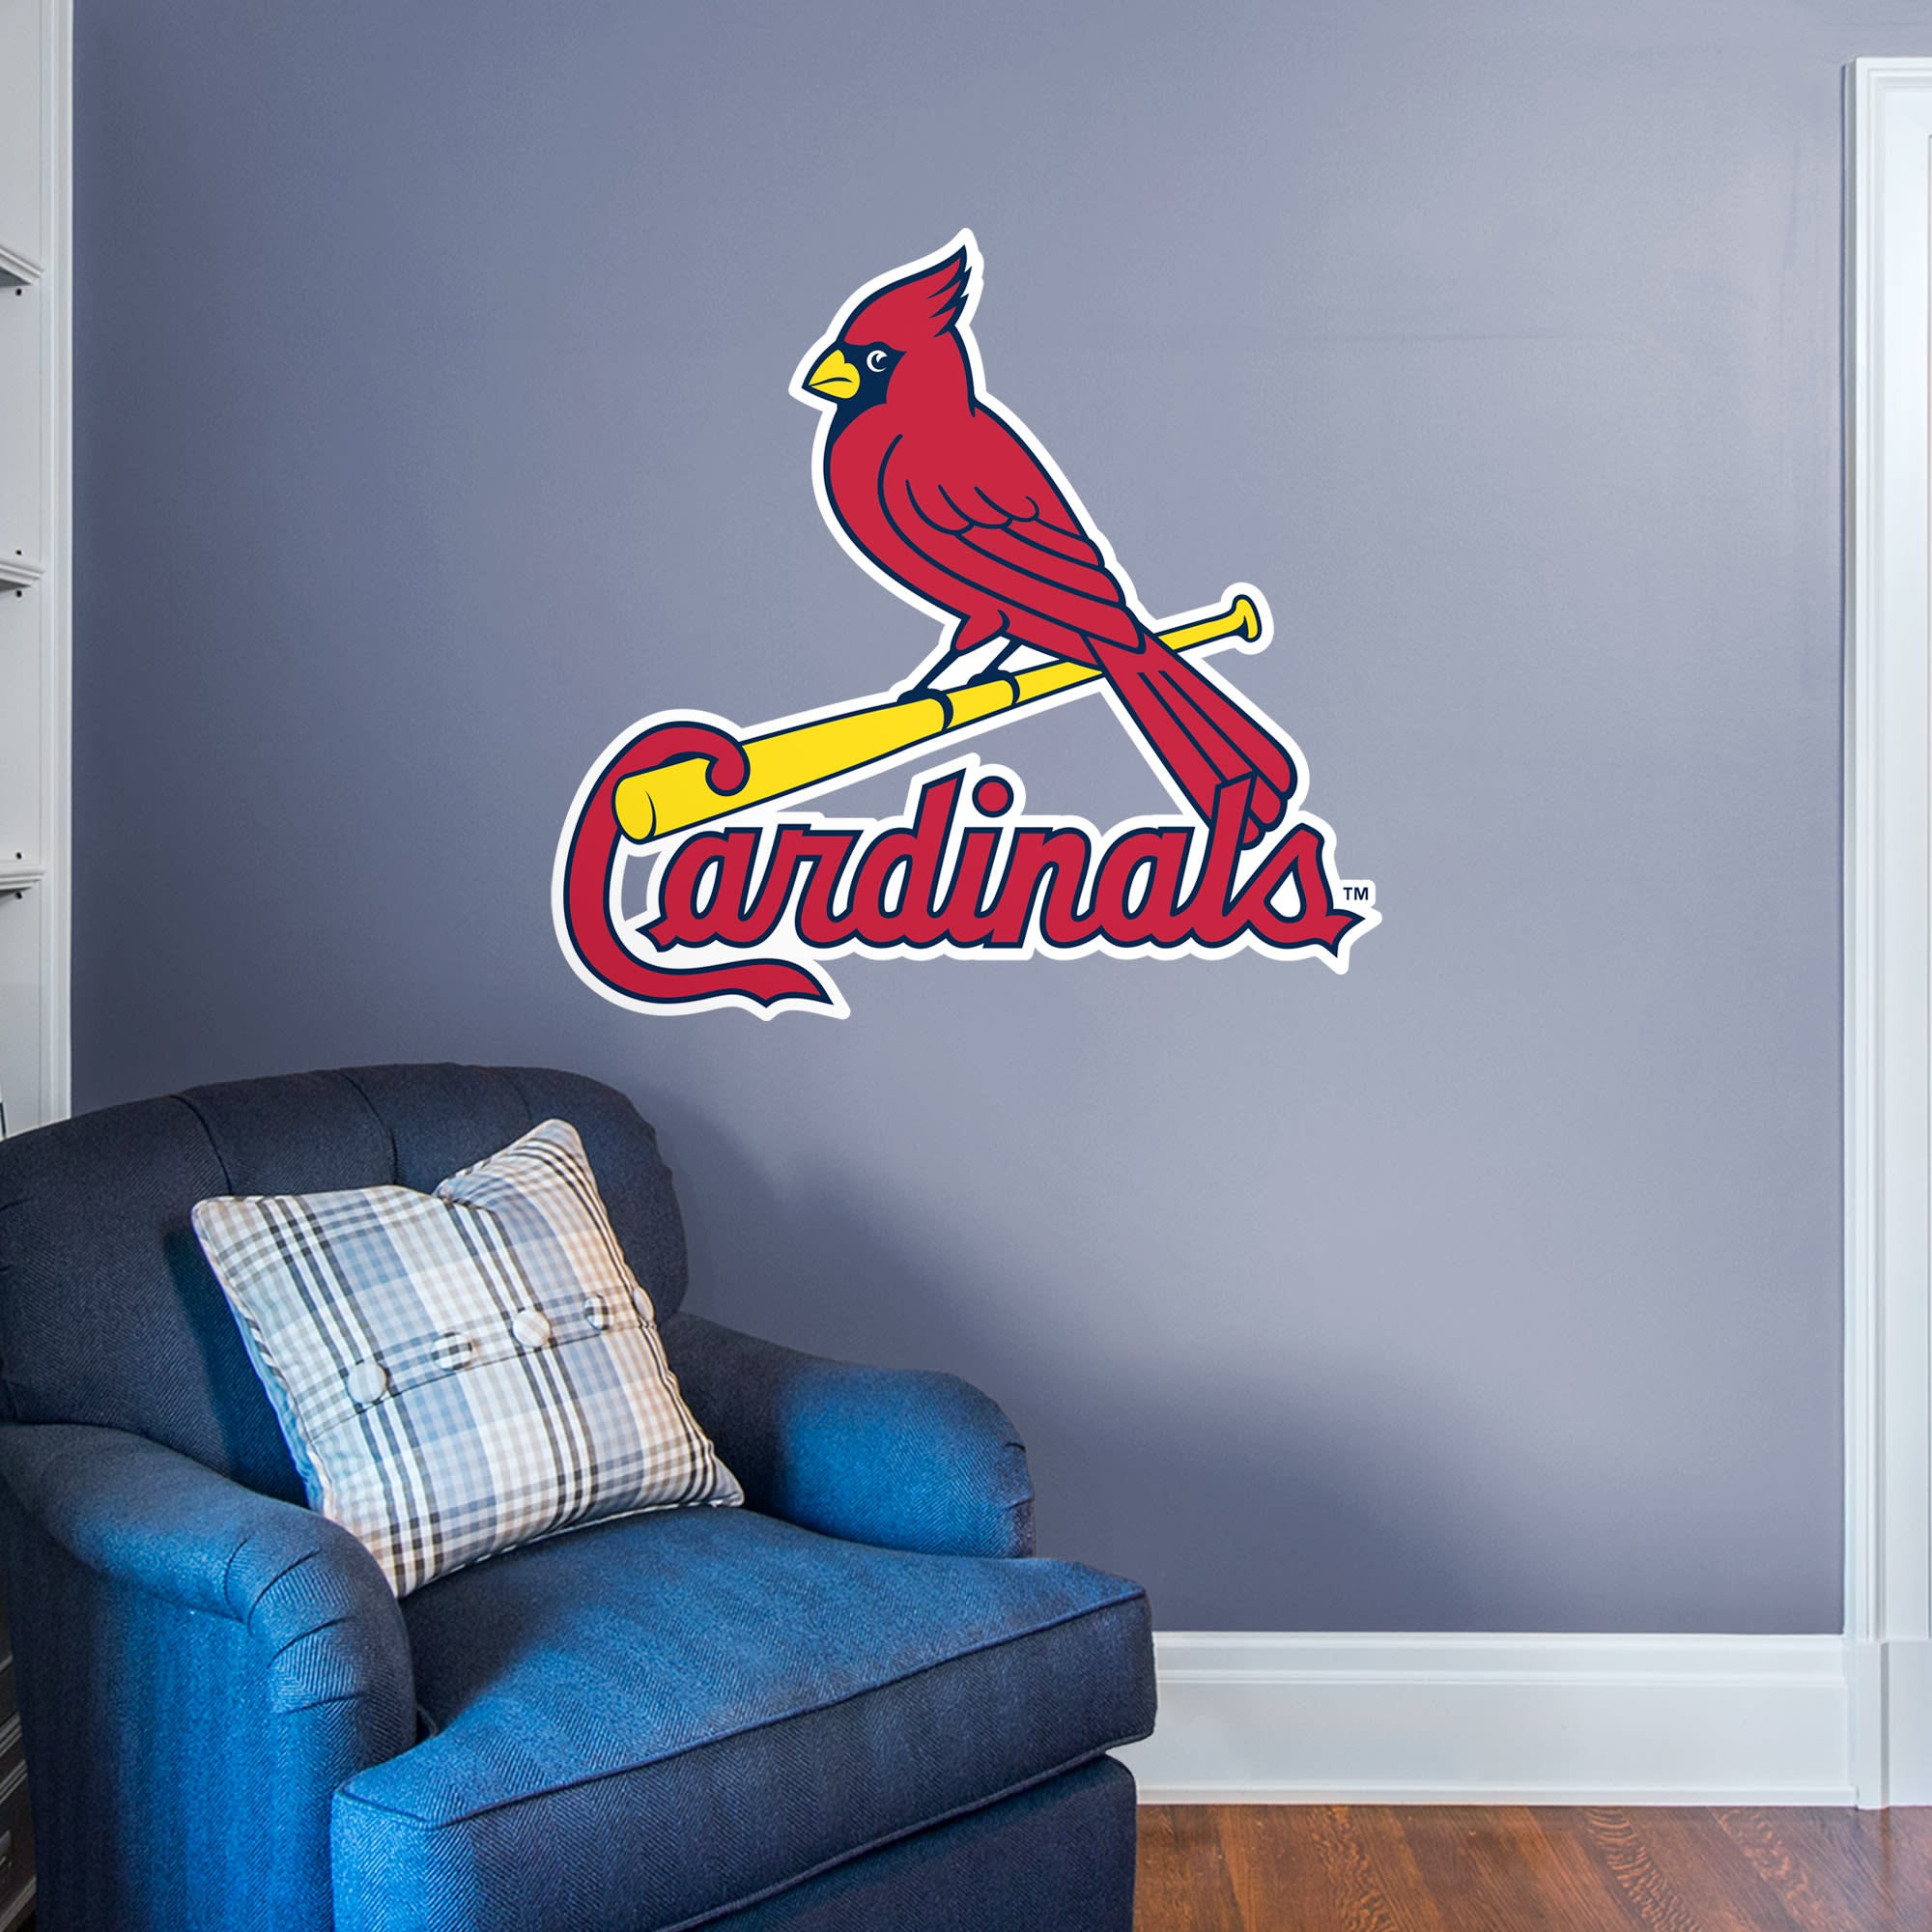 St. Louis Cardinals: Logo - Officially Licensed MLB Removable Wall Decal Giant Logo (41"W x 39"H) by Fathead | Vinyl